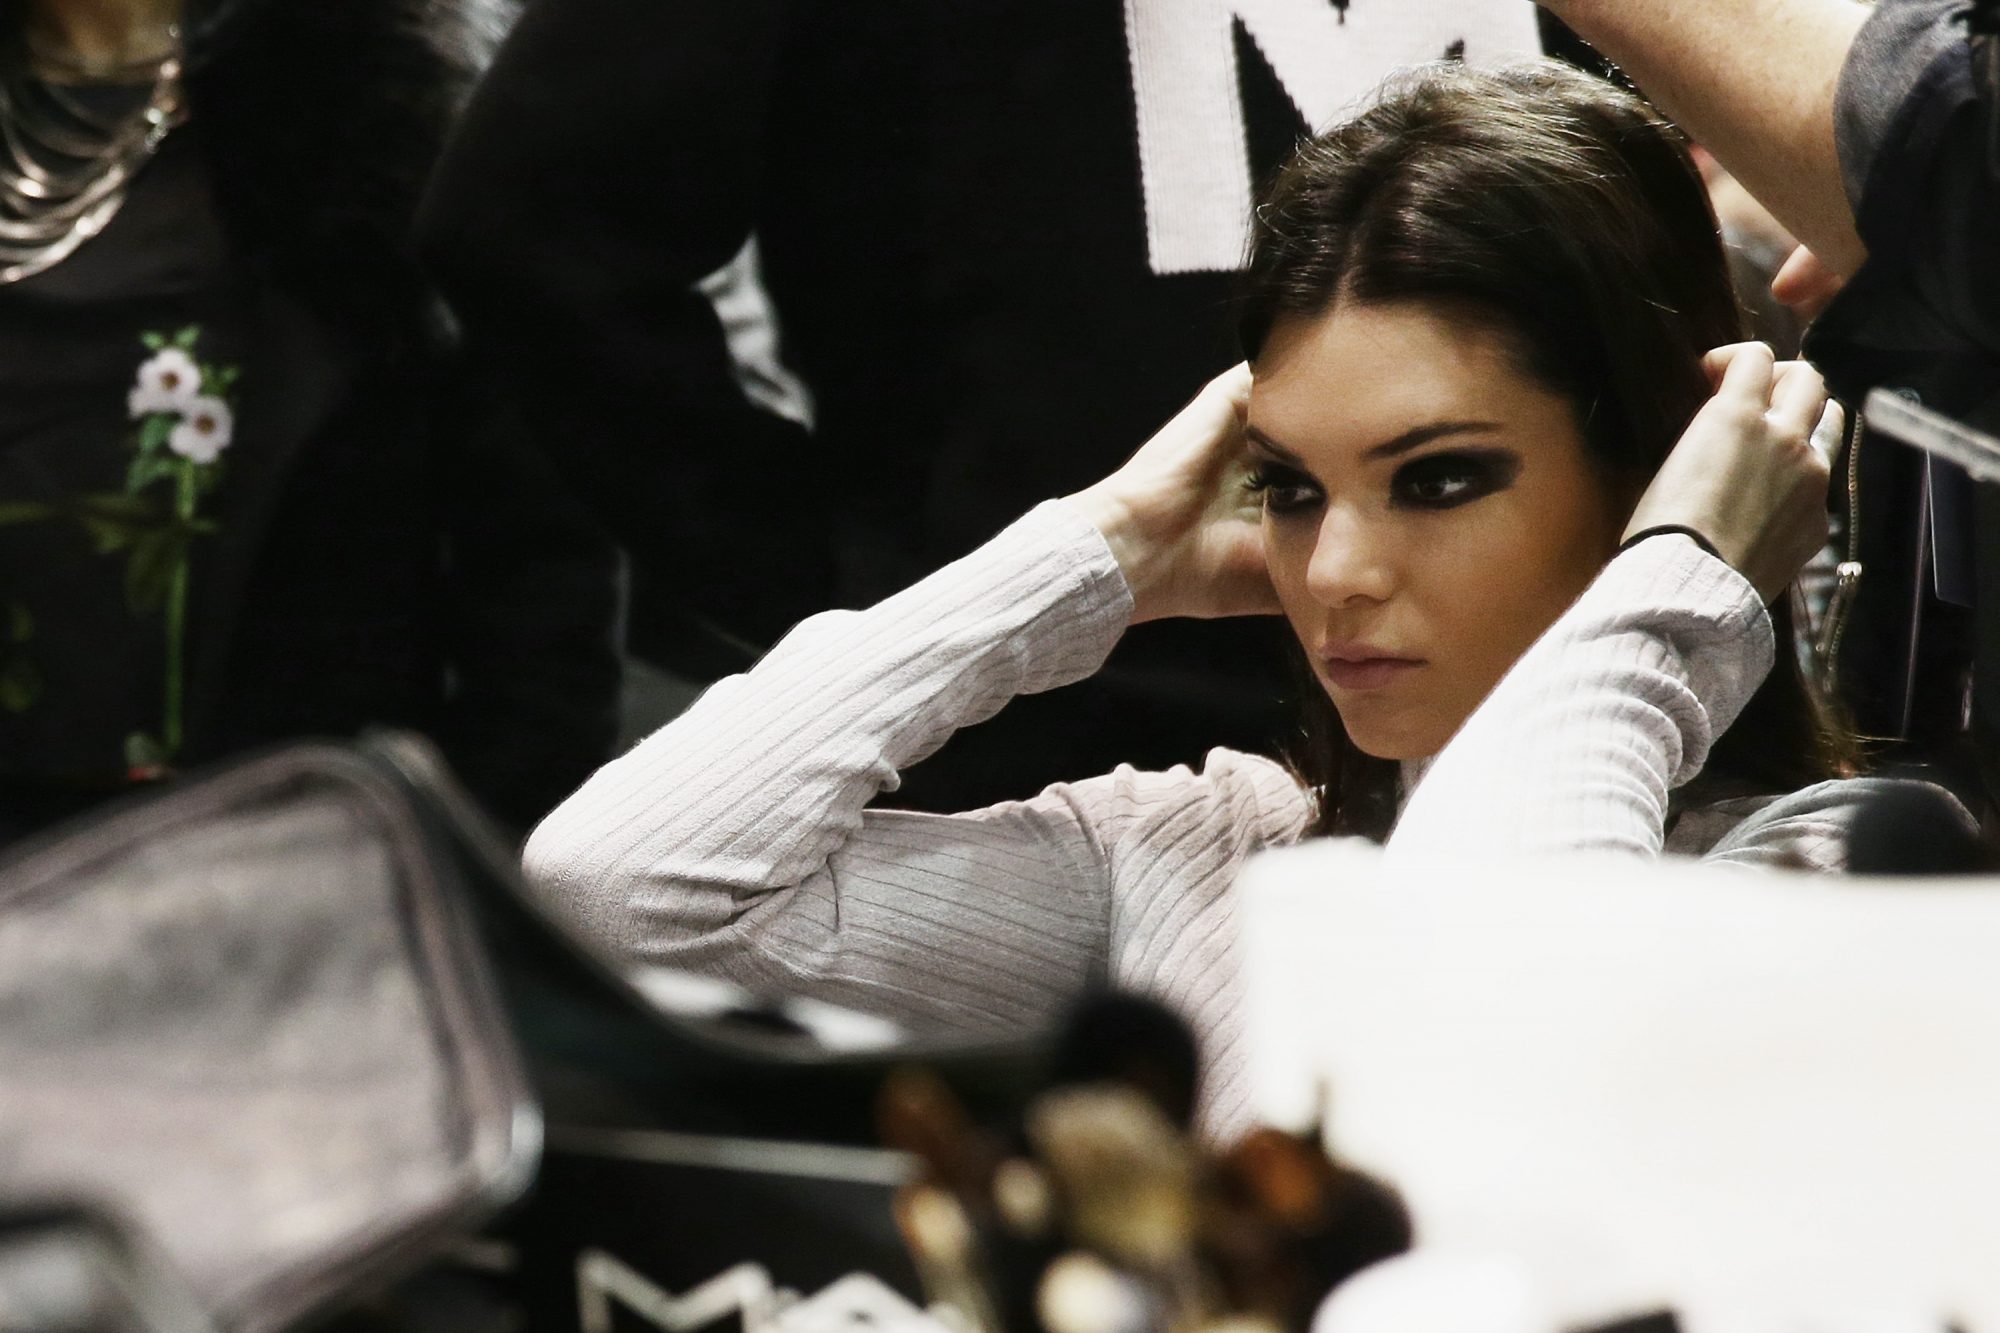 picture-of-kendall-jenner-backstage-photo.jpg